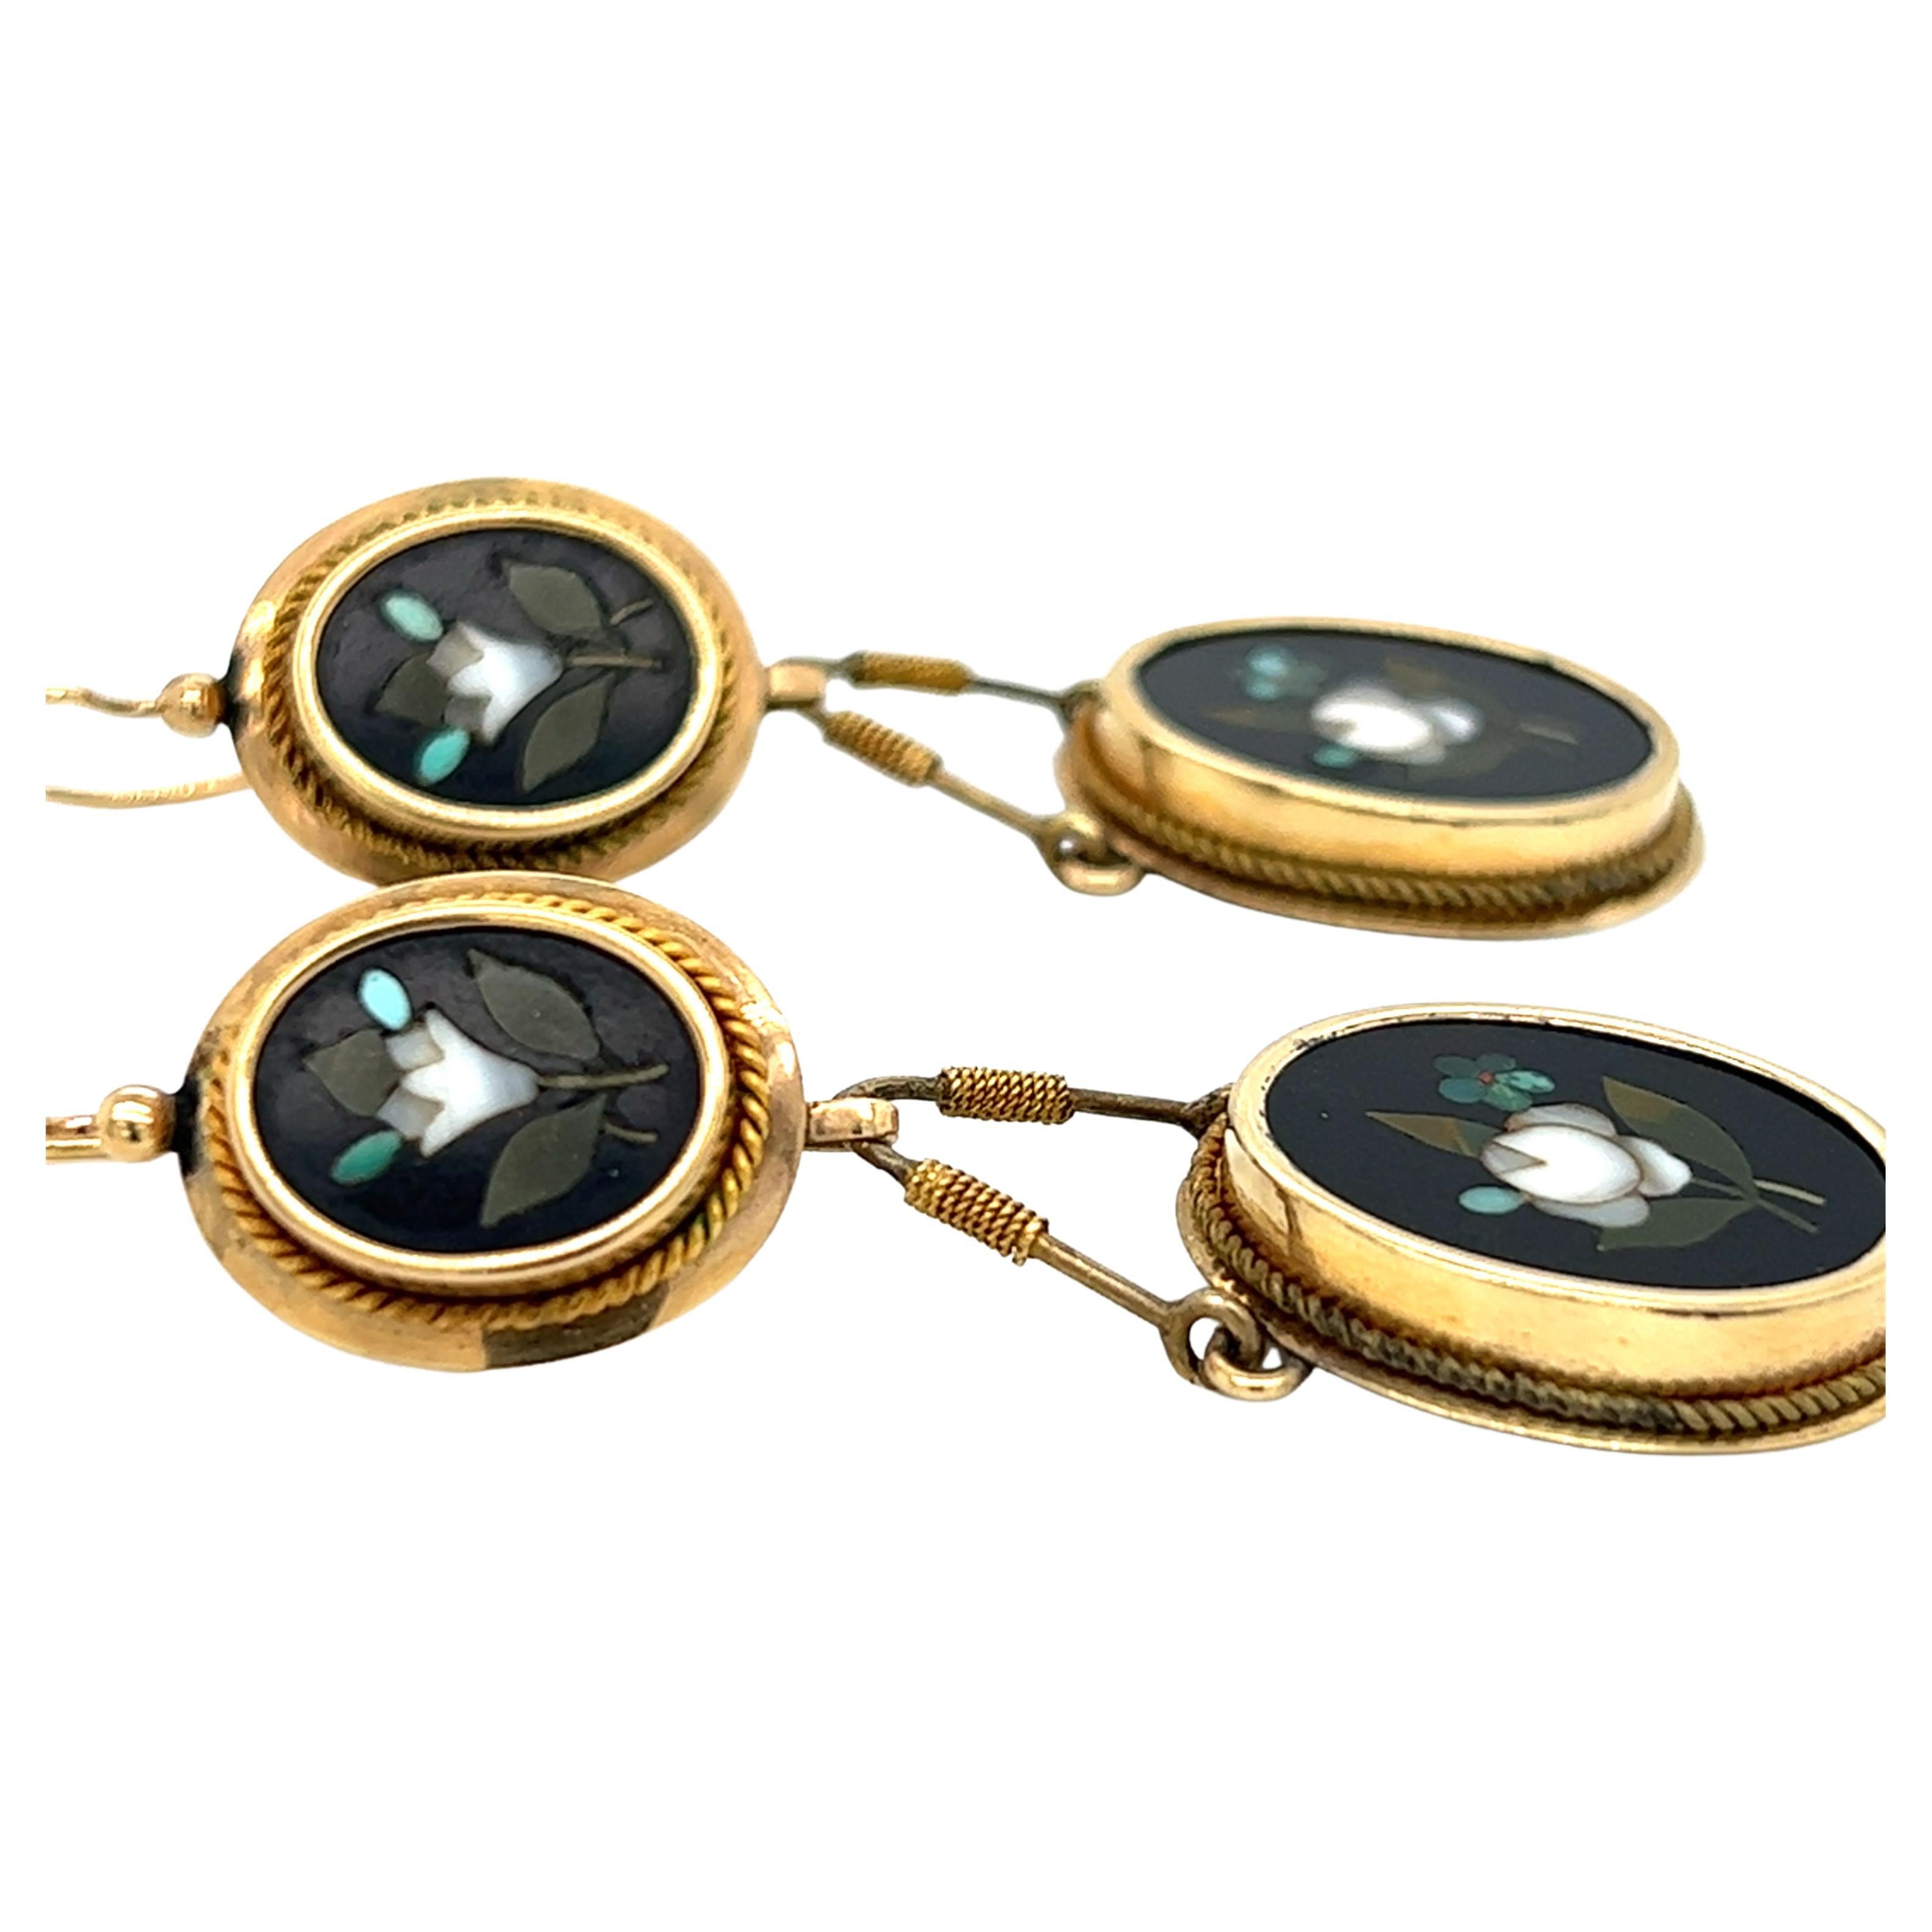 One pair of 14-karat yellow gold Victorian Pietra Dura mosaic twin oval drop pendant design earrings.  The earrings measure approximately 2.25 inches long and are complete with traditional hook closures.